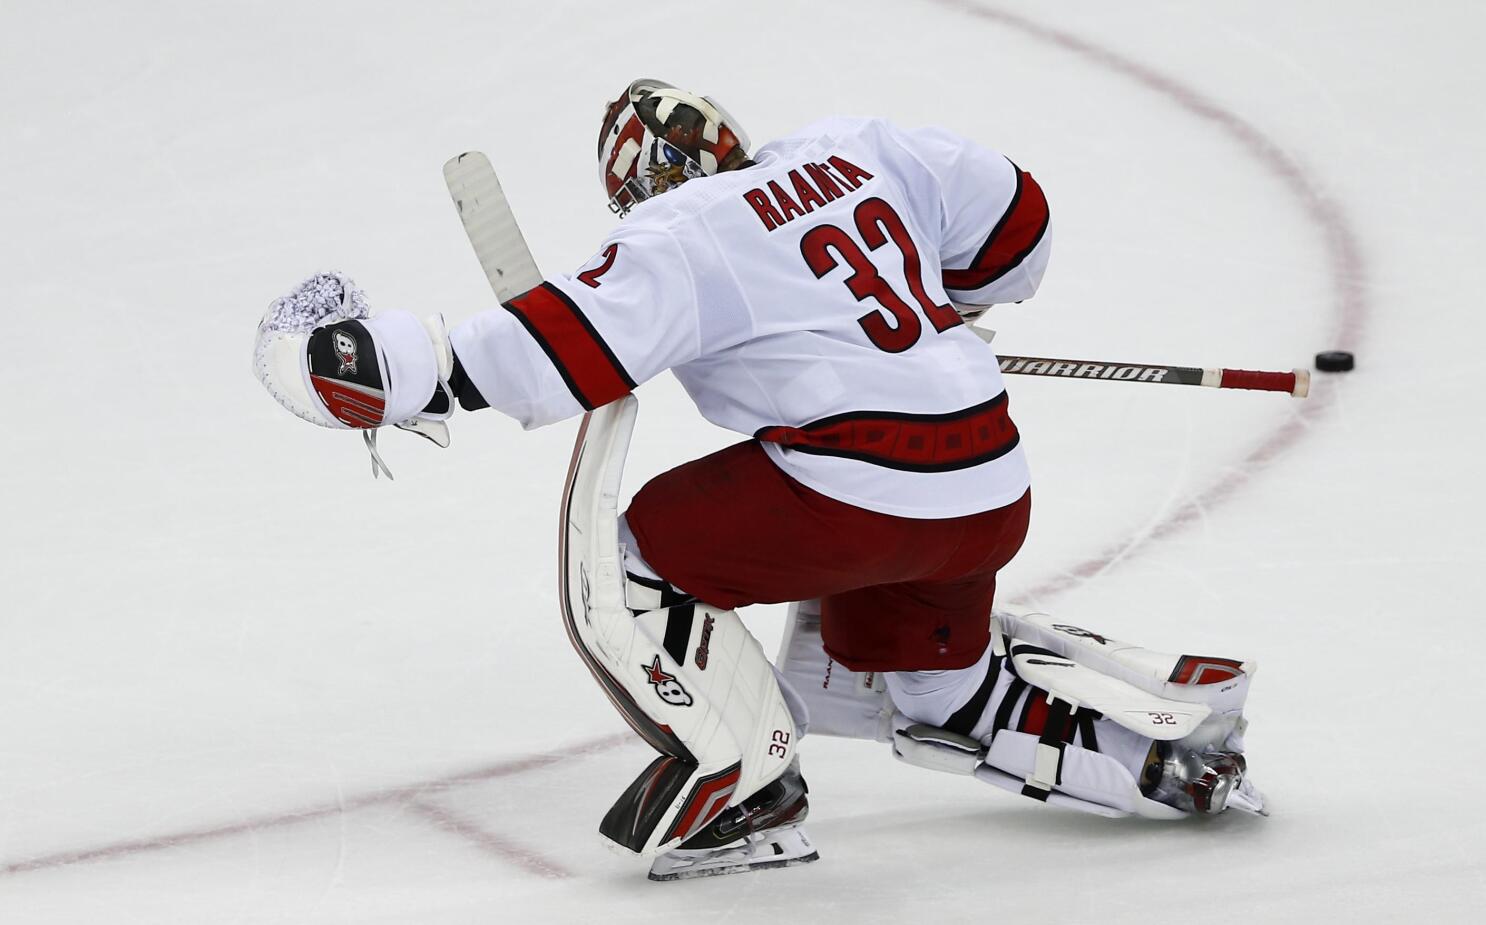 Devils fall 4-3 to Panthers in first loss of the season